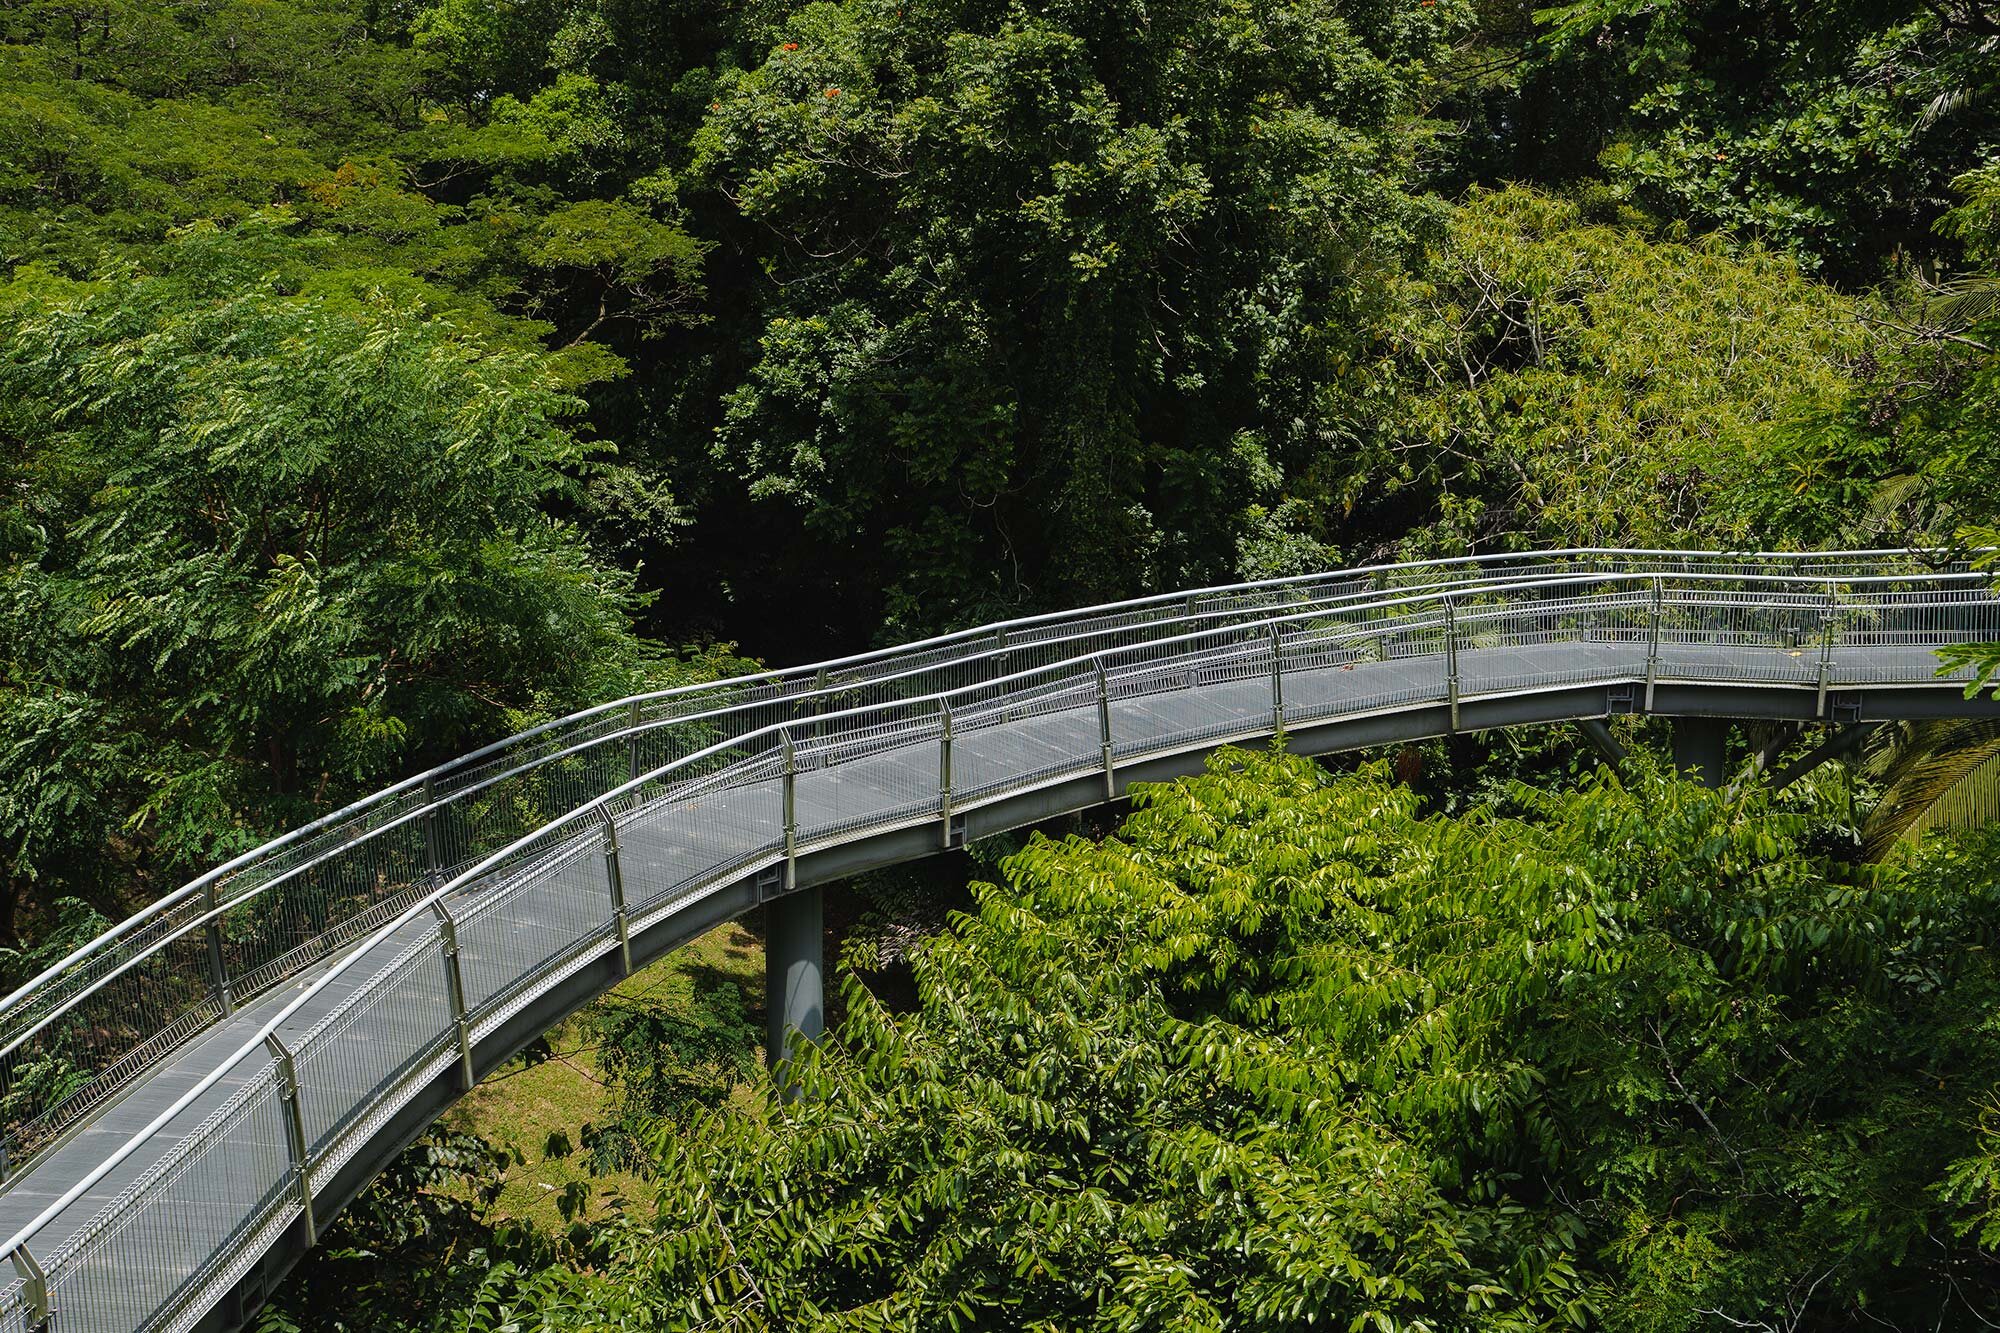 The&nbsp;Southern Ridges&nbsp;comprise 10 kilometres (6.2 mi) of trails connecting three parks along the&nbsp;southern ridge&nbsp;of Singapore.